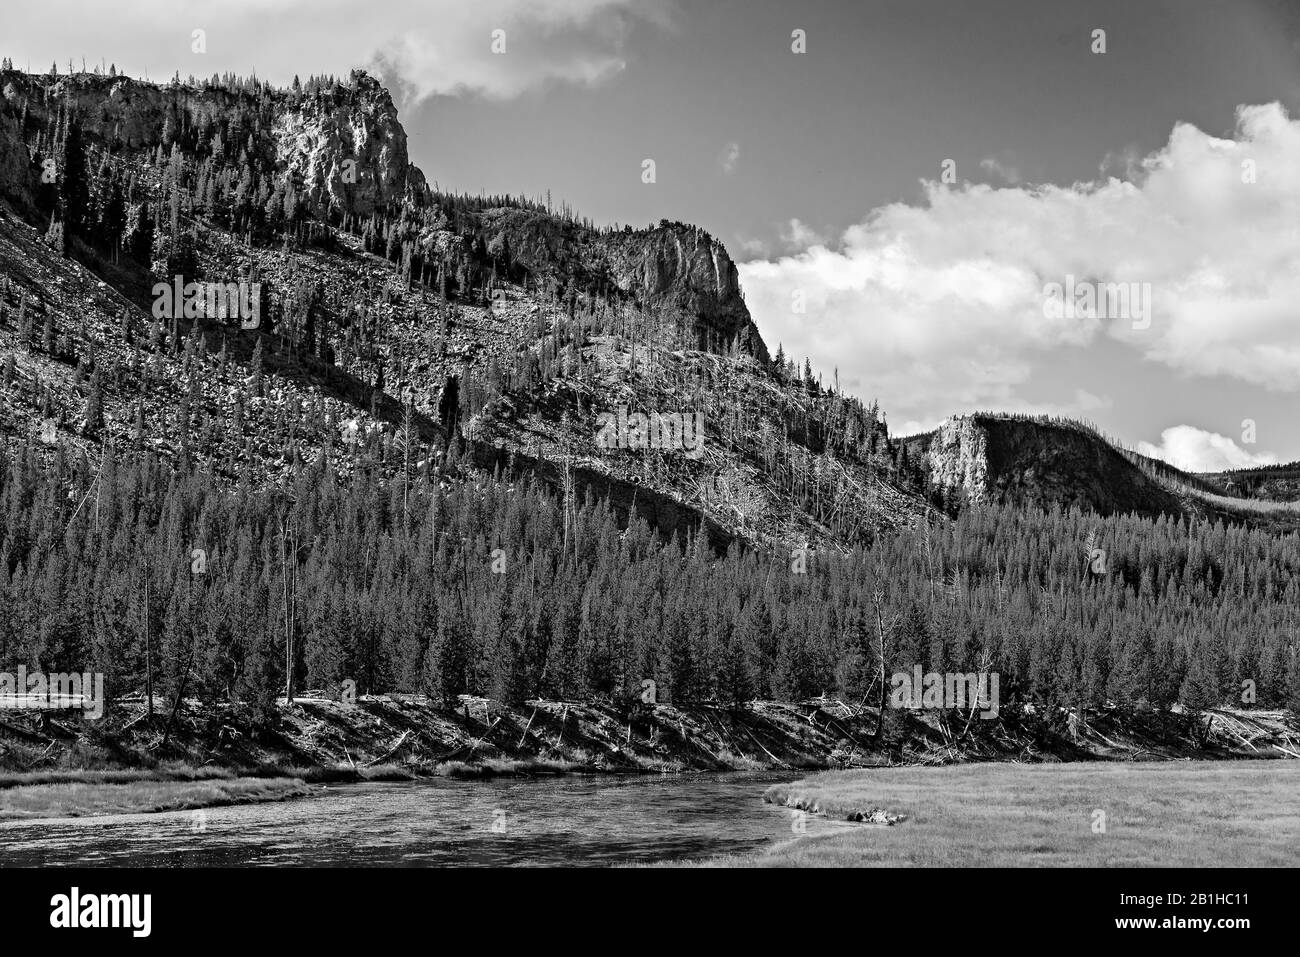 Black and white. Running river with pine tree forest on riverbank leadings to steep rocky mountainside. White clouds in sky. No masks required. Stock Photo